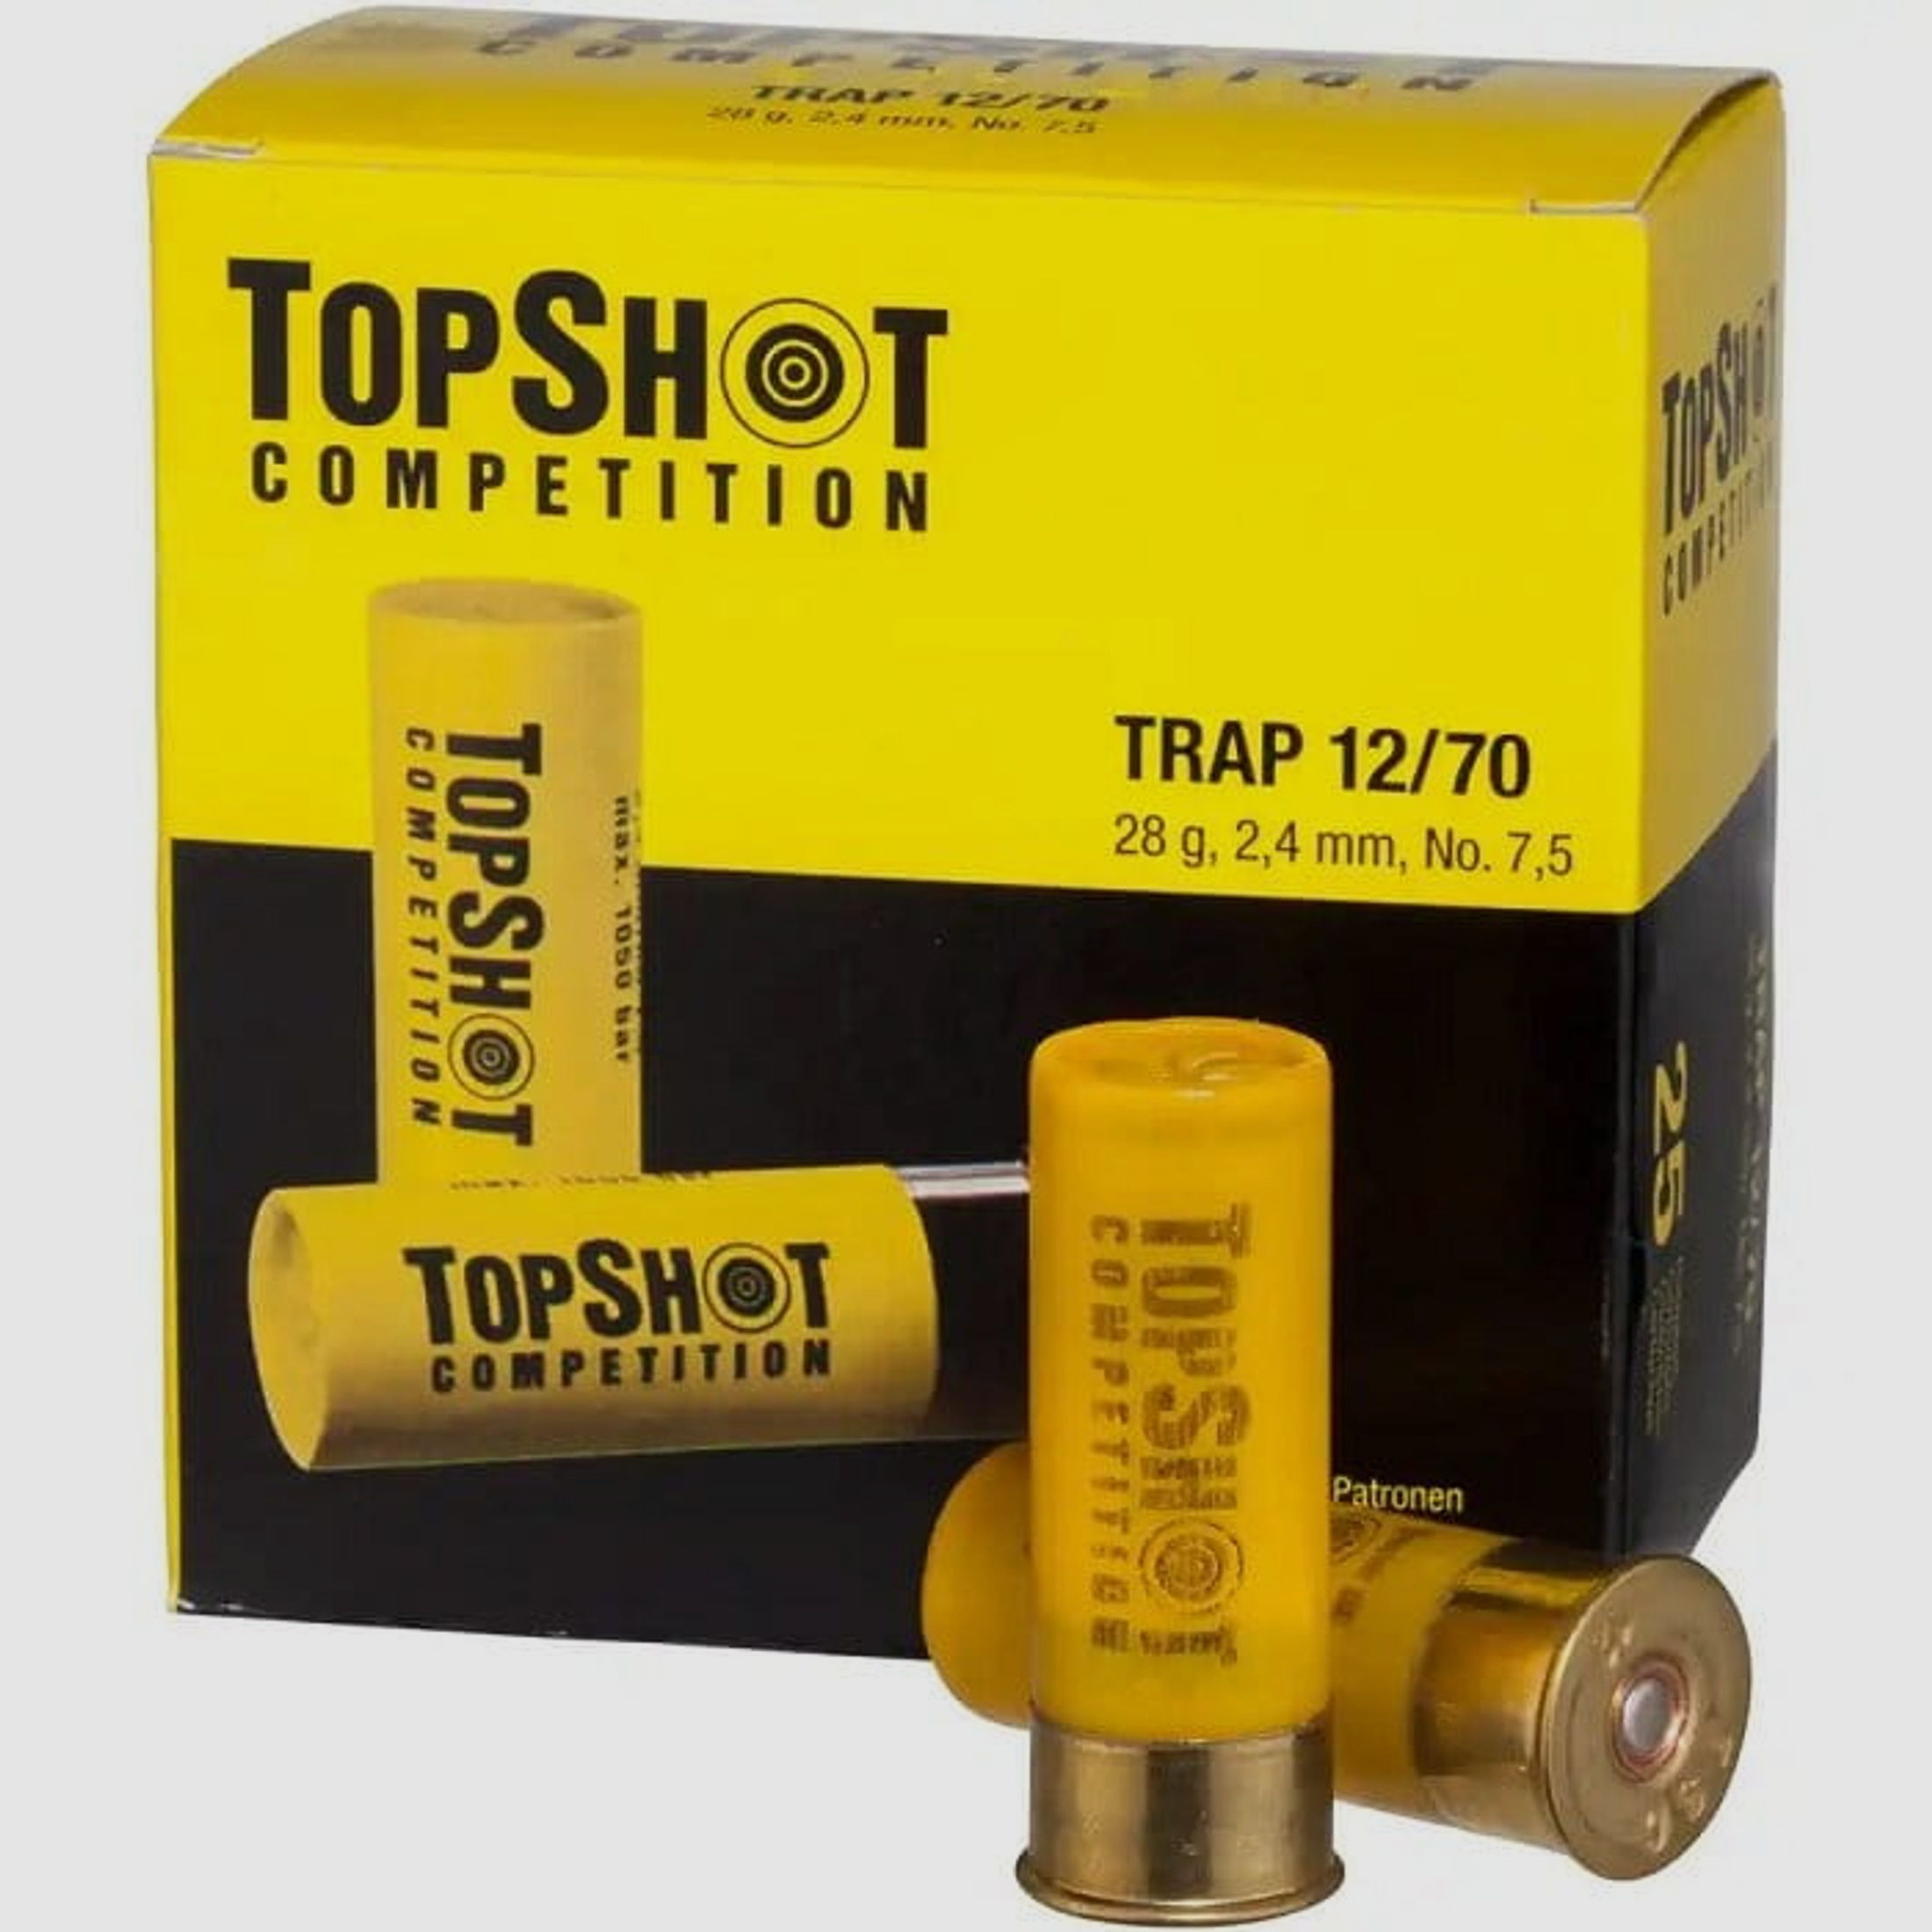 TOPSHOT Competition 12/70 Trap 2,4 mm 28 g - 25 Stk.